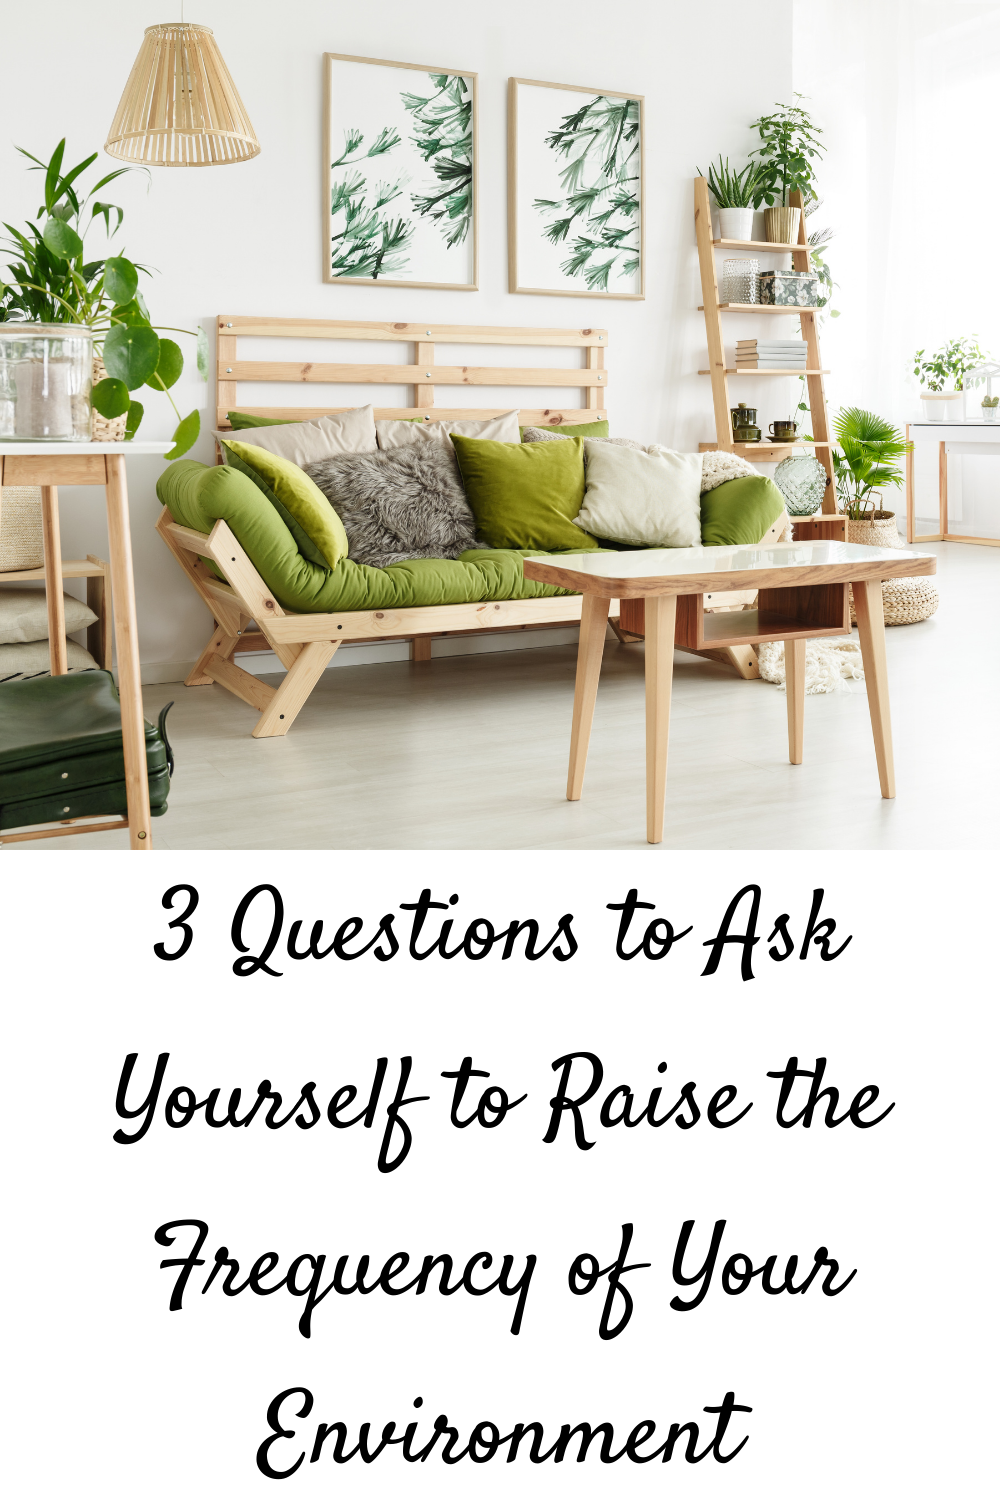 3 Questions to Ask Yourself to Raise the Frequency of Your Environment